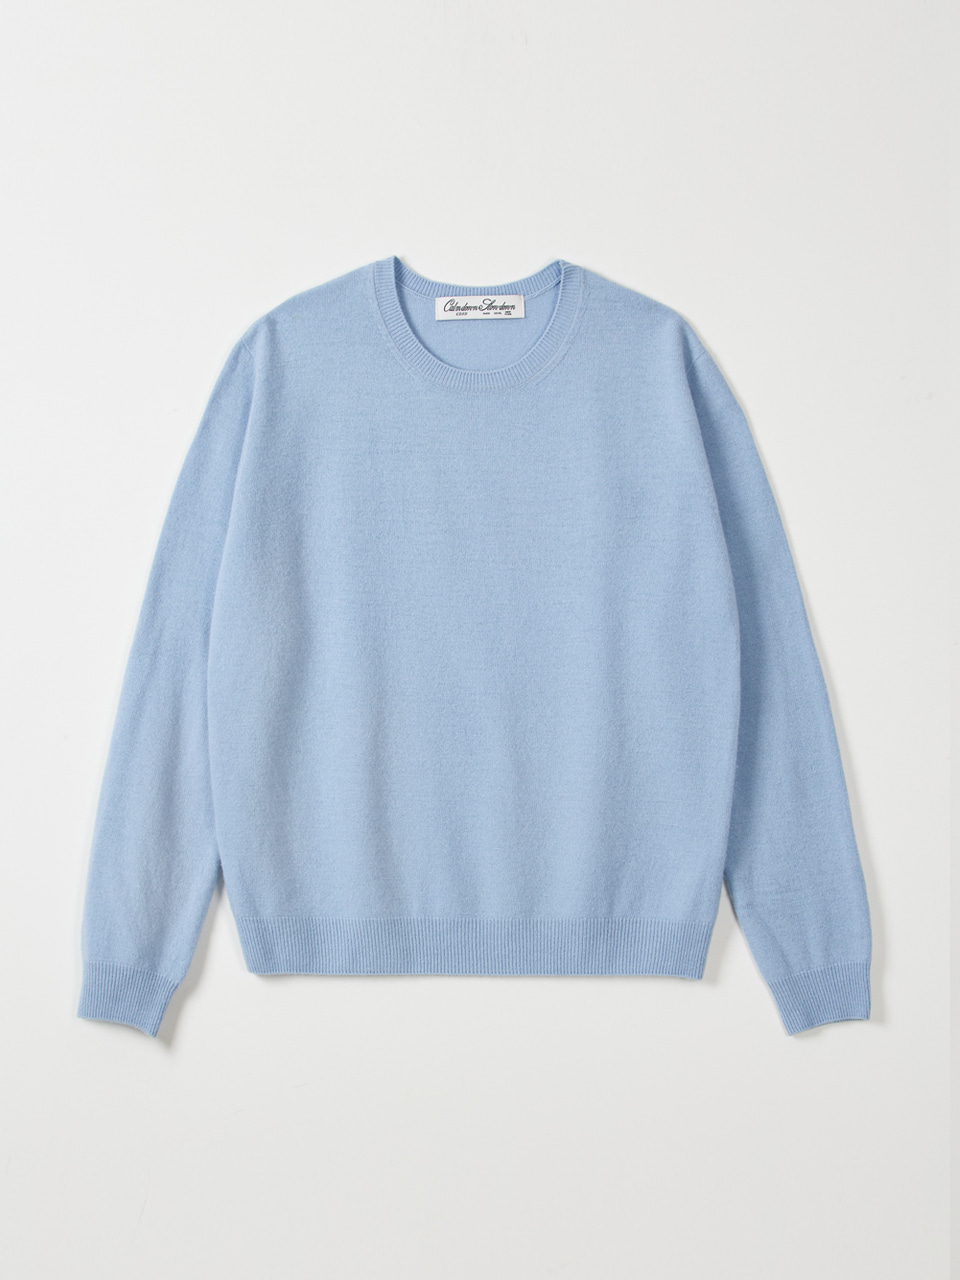 [PRE-ORDER]Crew-neck wool cashmere knitwear_sky blue((미입금취소분 1/31 재오픈)